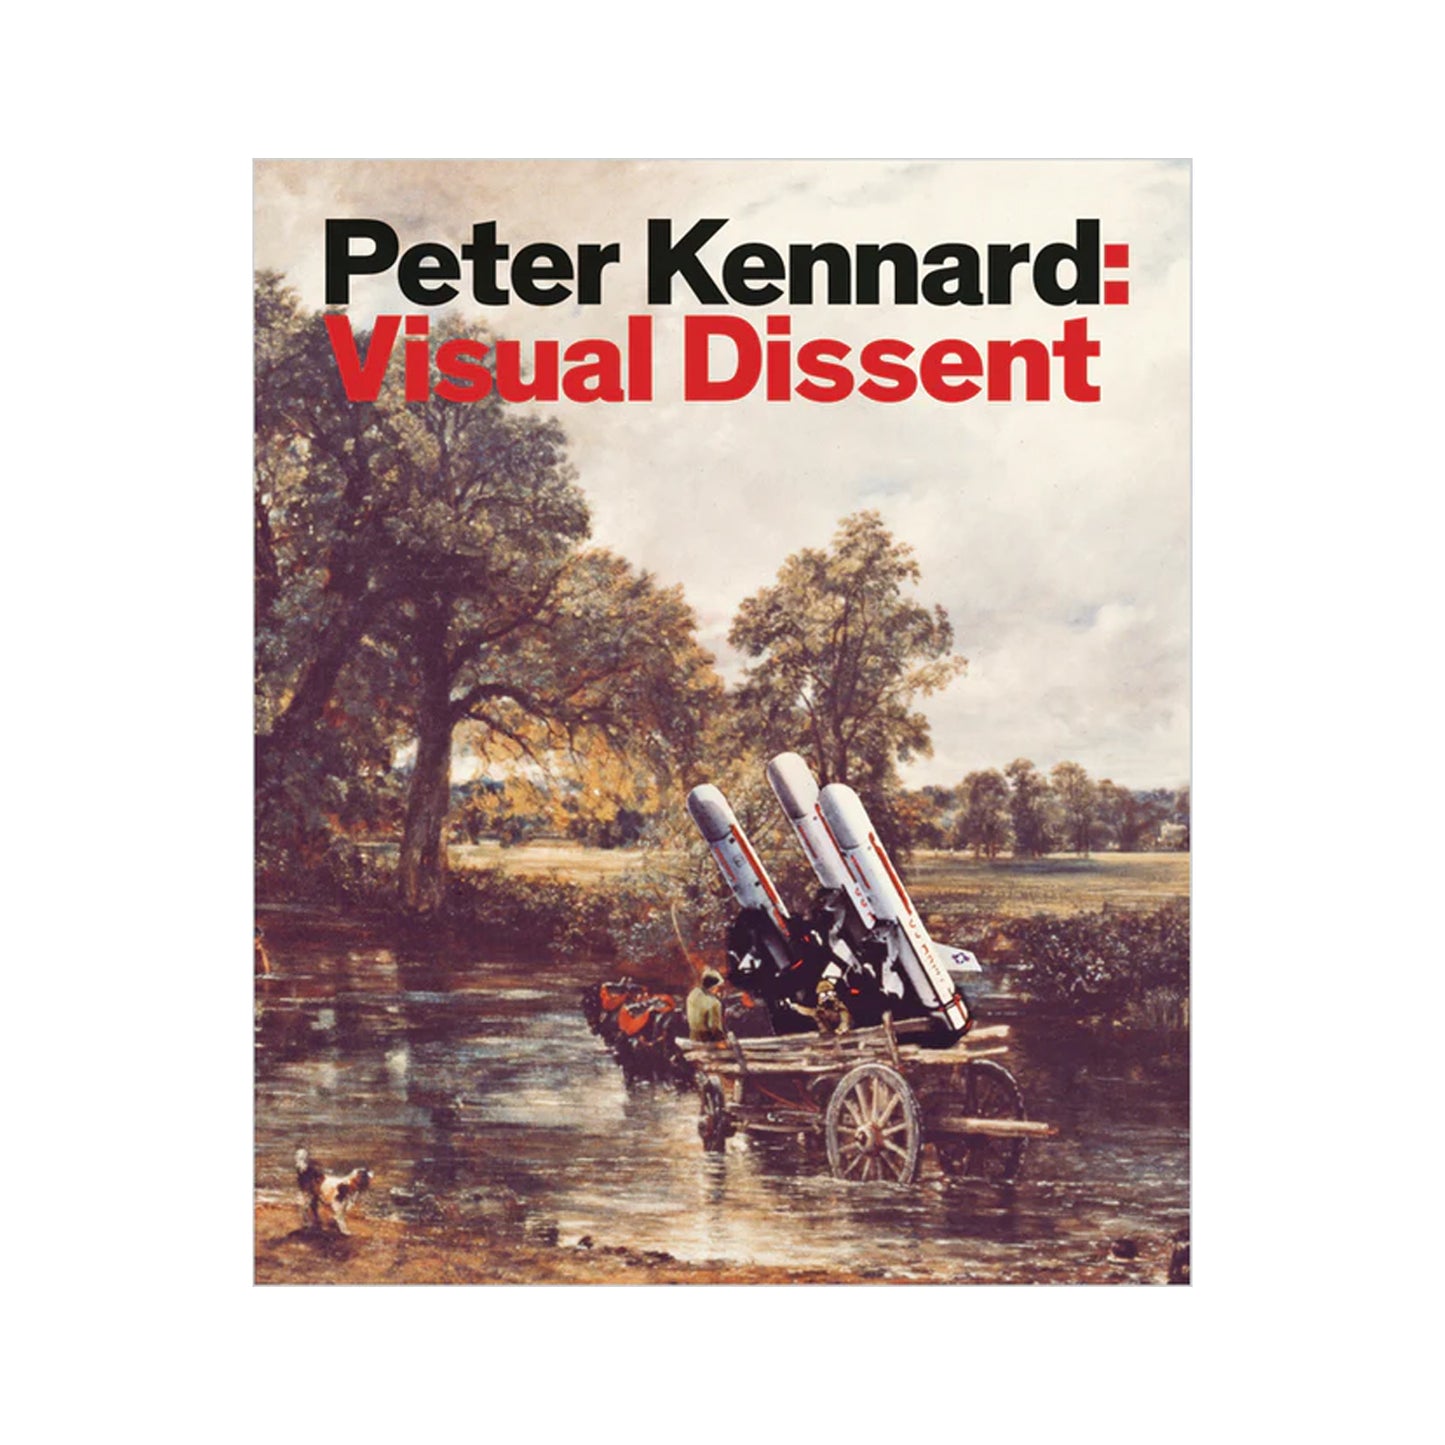 Visual Dissent by Peter Kennard